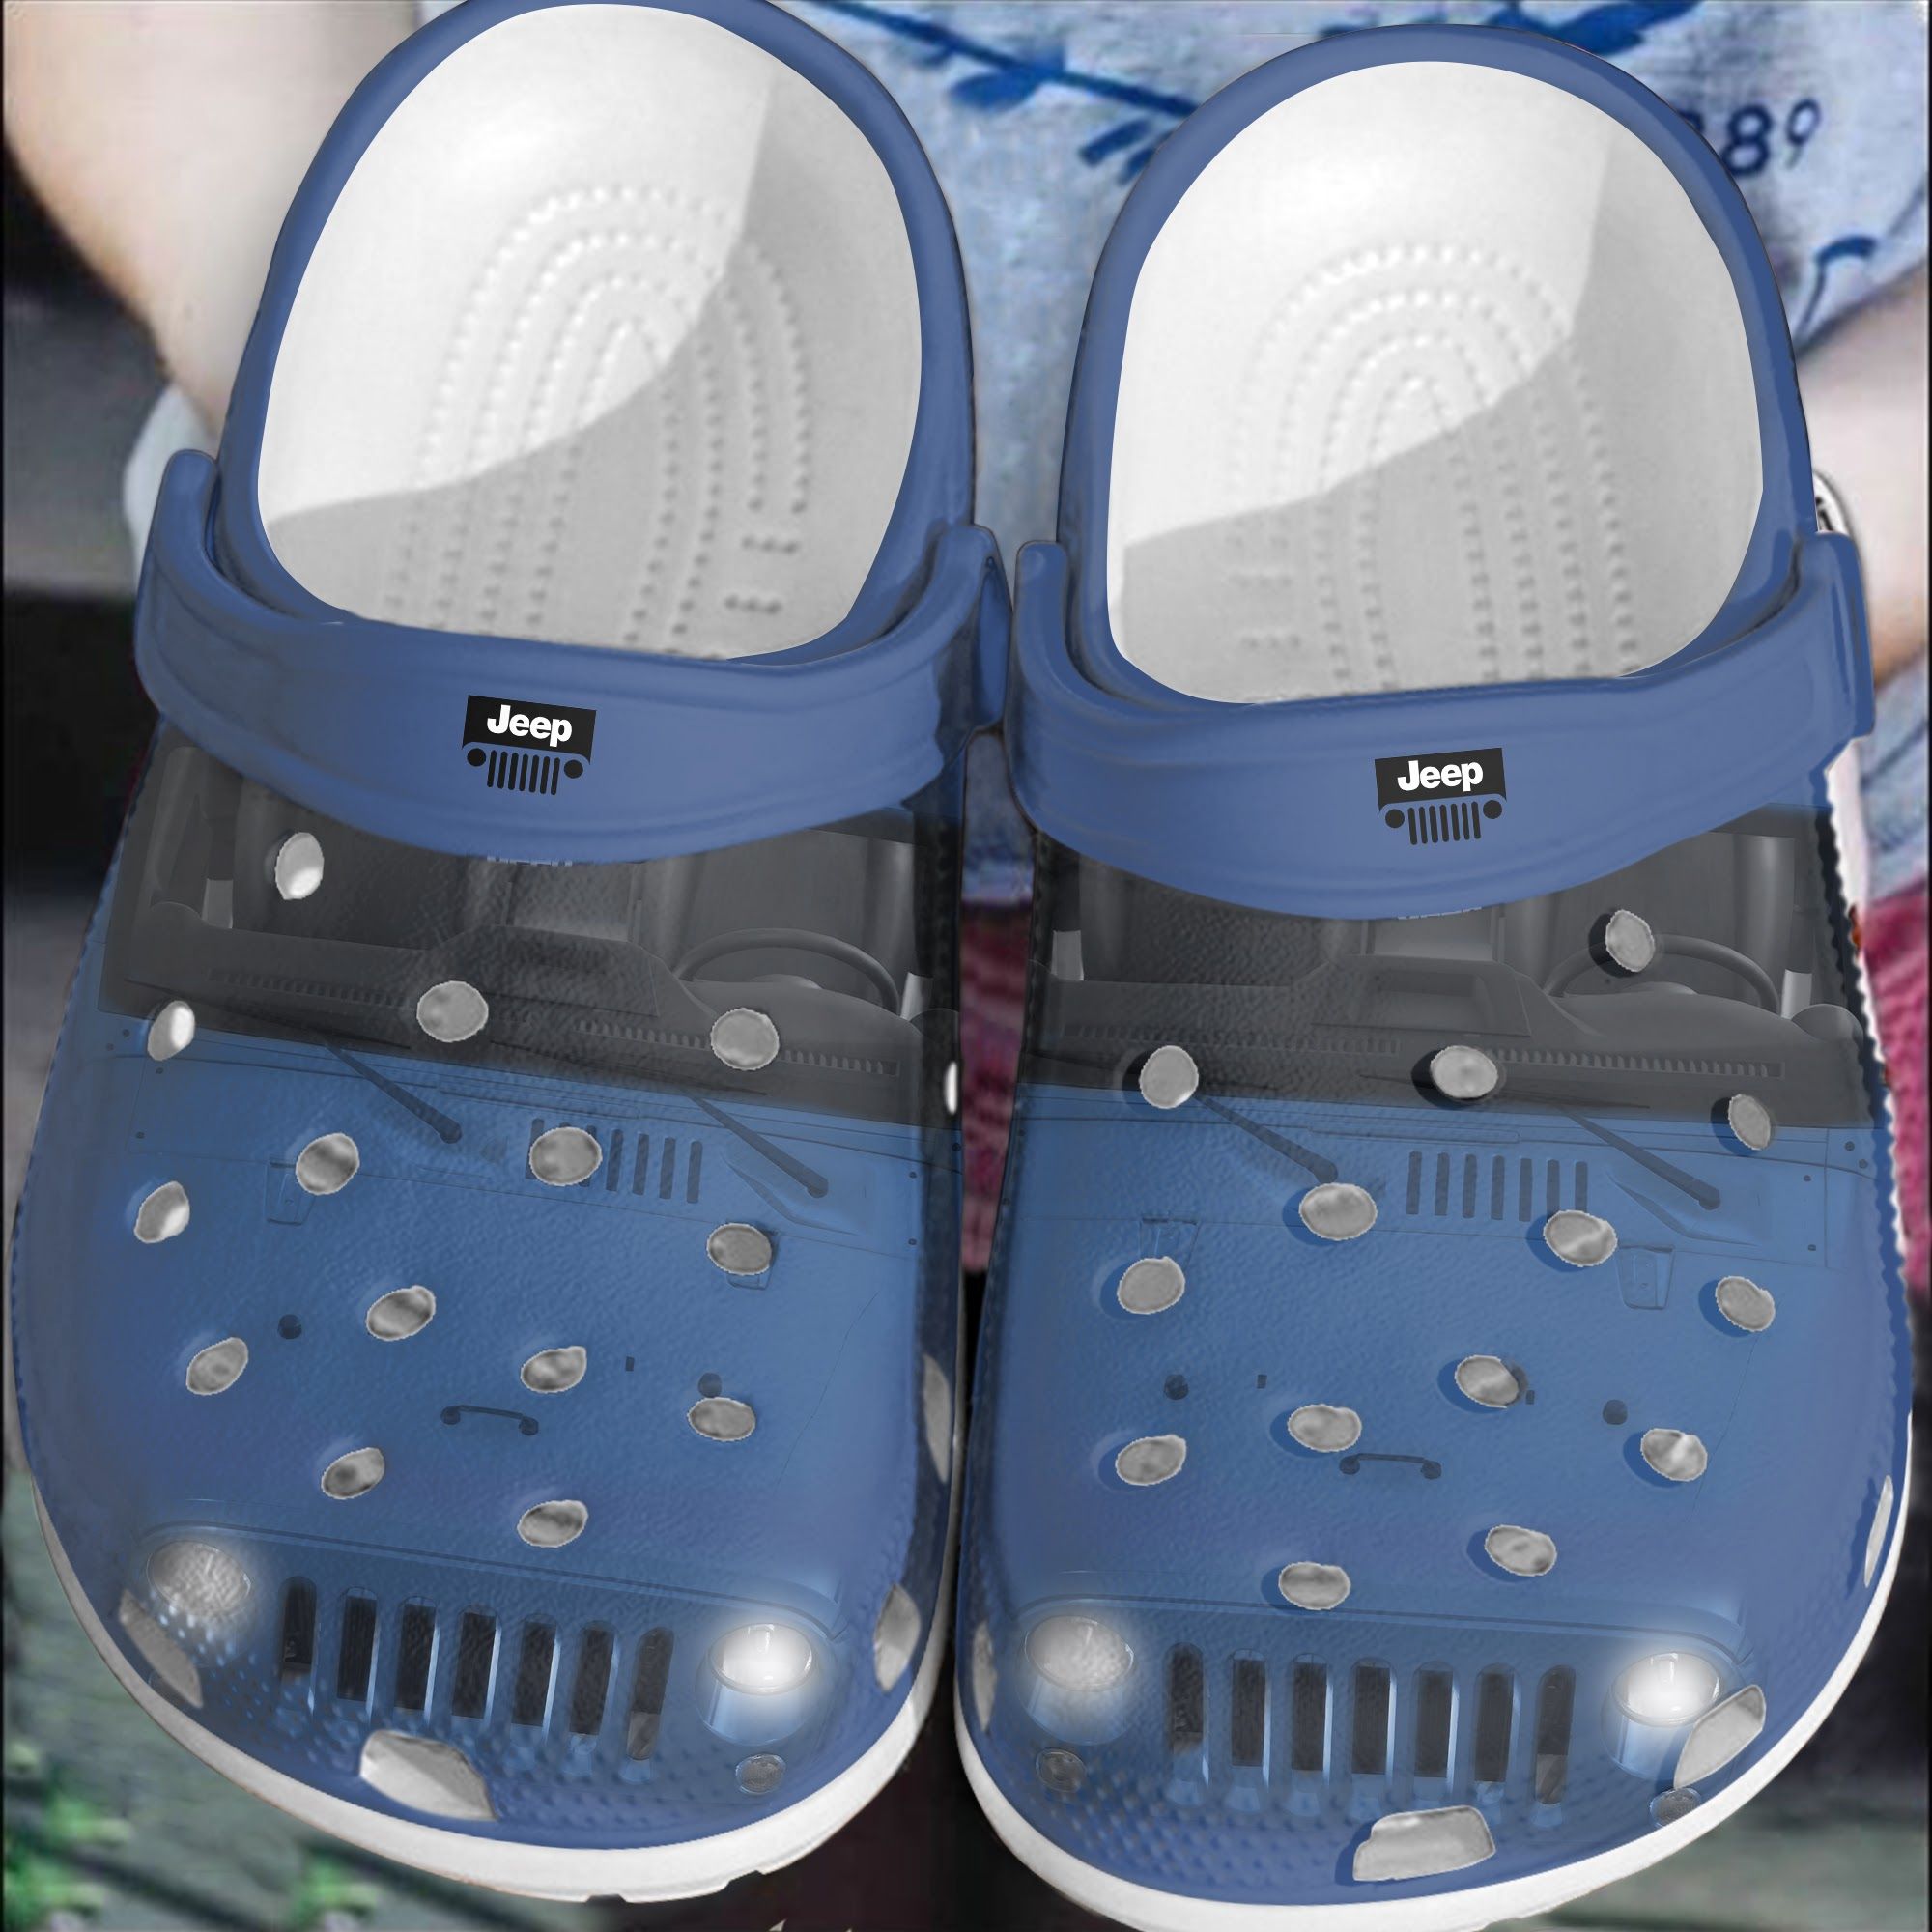 Find yourself a super cute Crocs shoe or give it as a gift 243